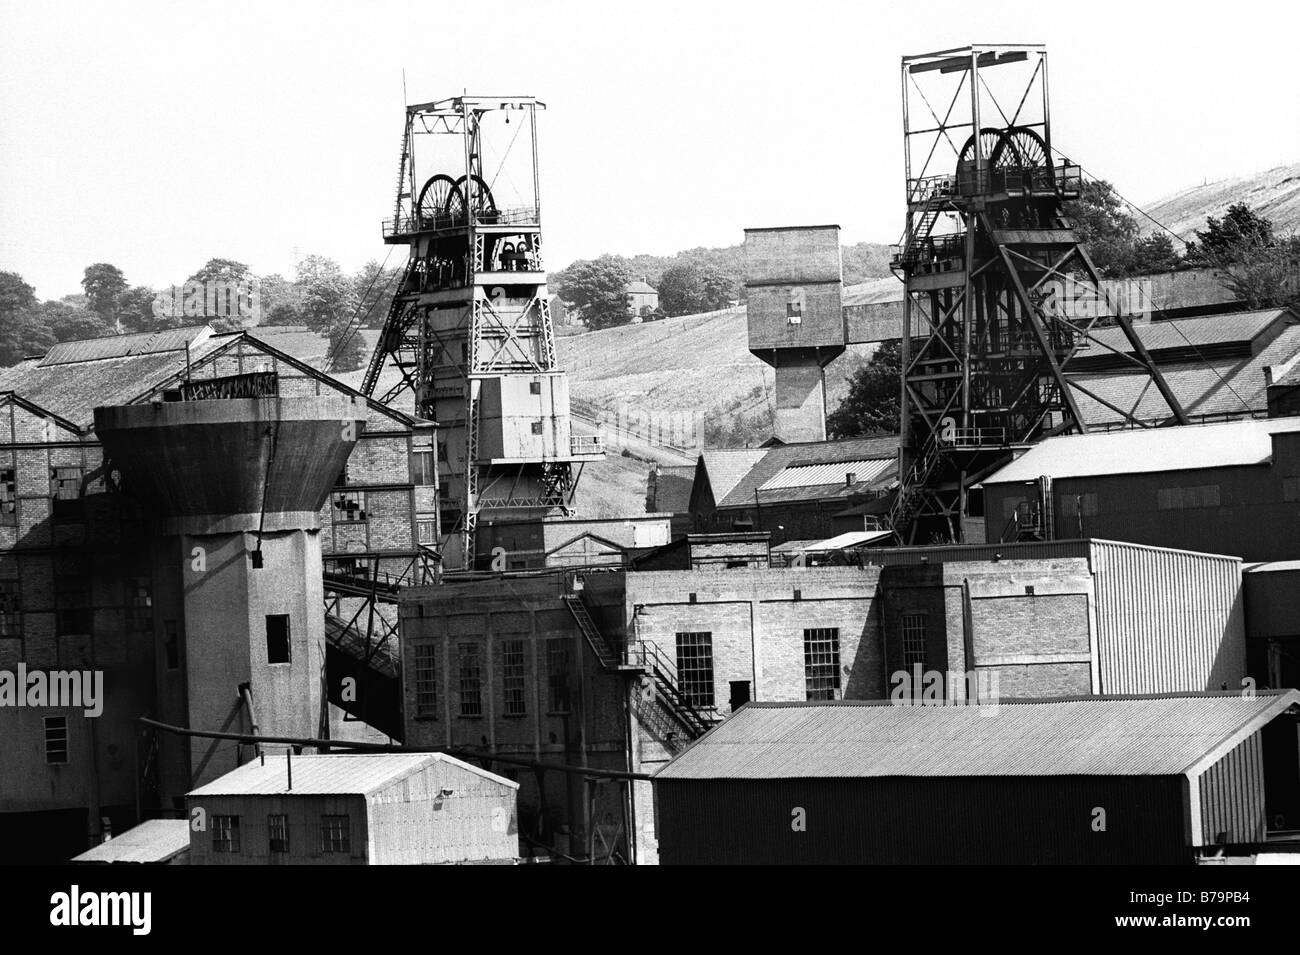 25th August 1989 View of the mining complex Oakdale Colliery South Wales the coal mine closed shortly after this photo was taken Stock Photo